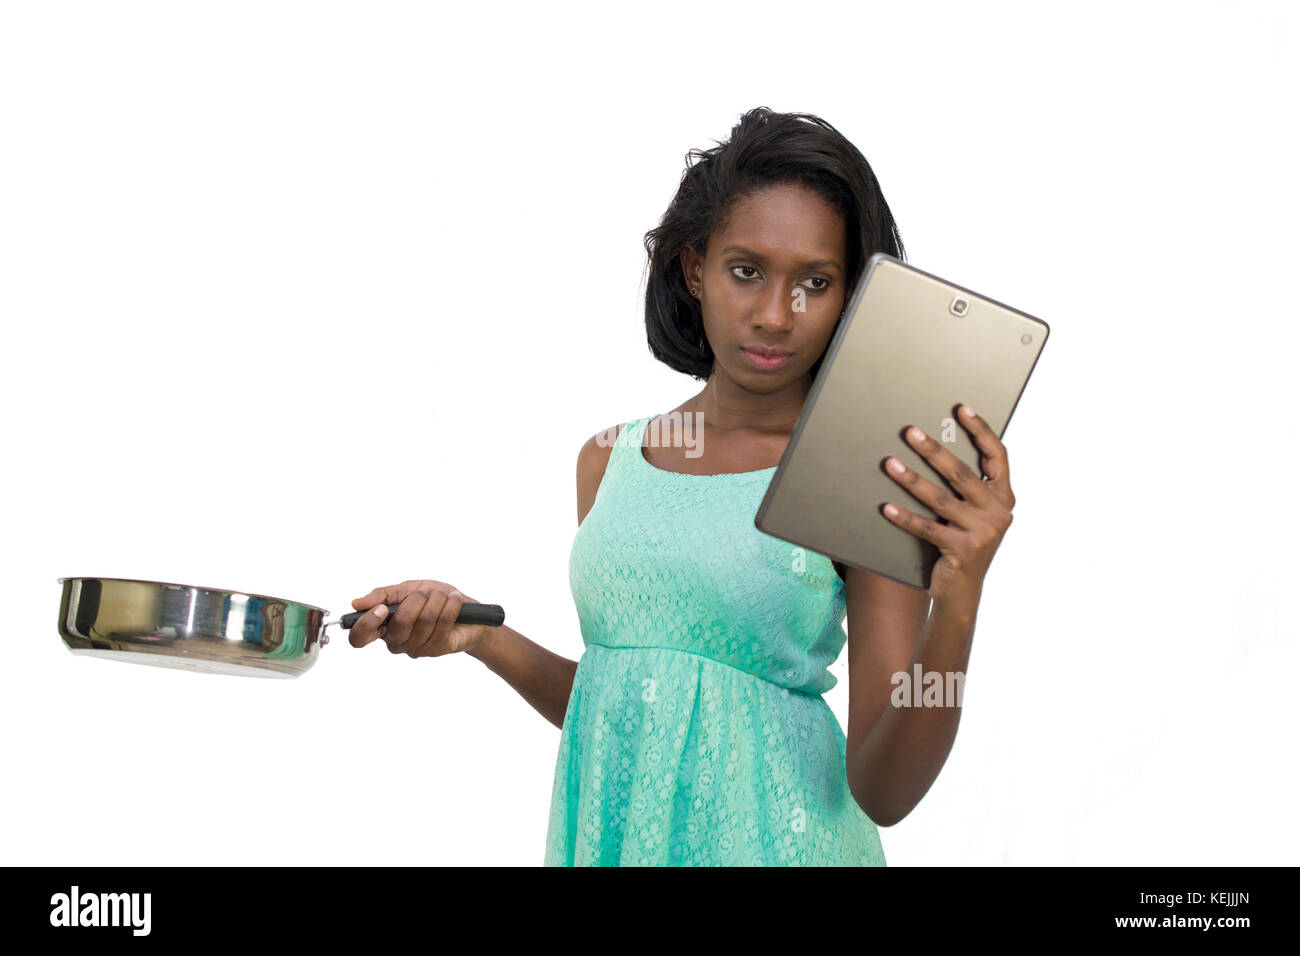 Woman holding pan and digital tablet Stock Photo